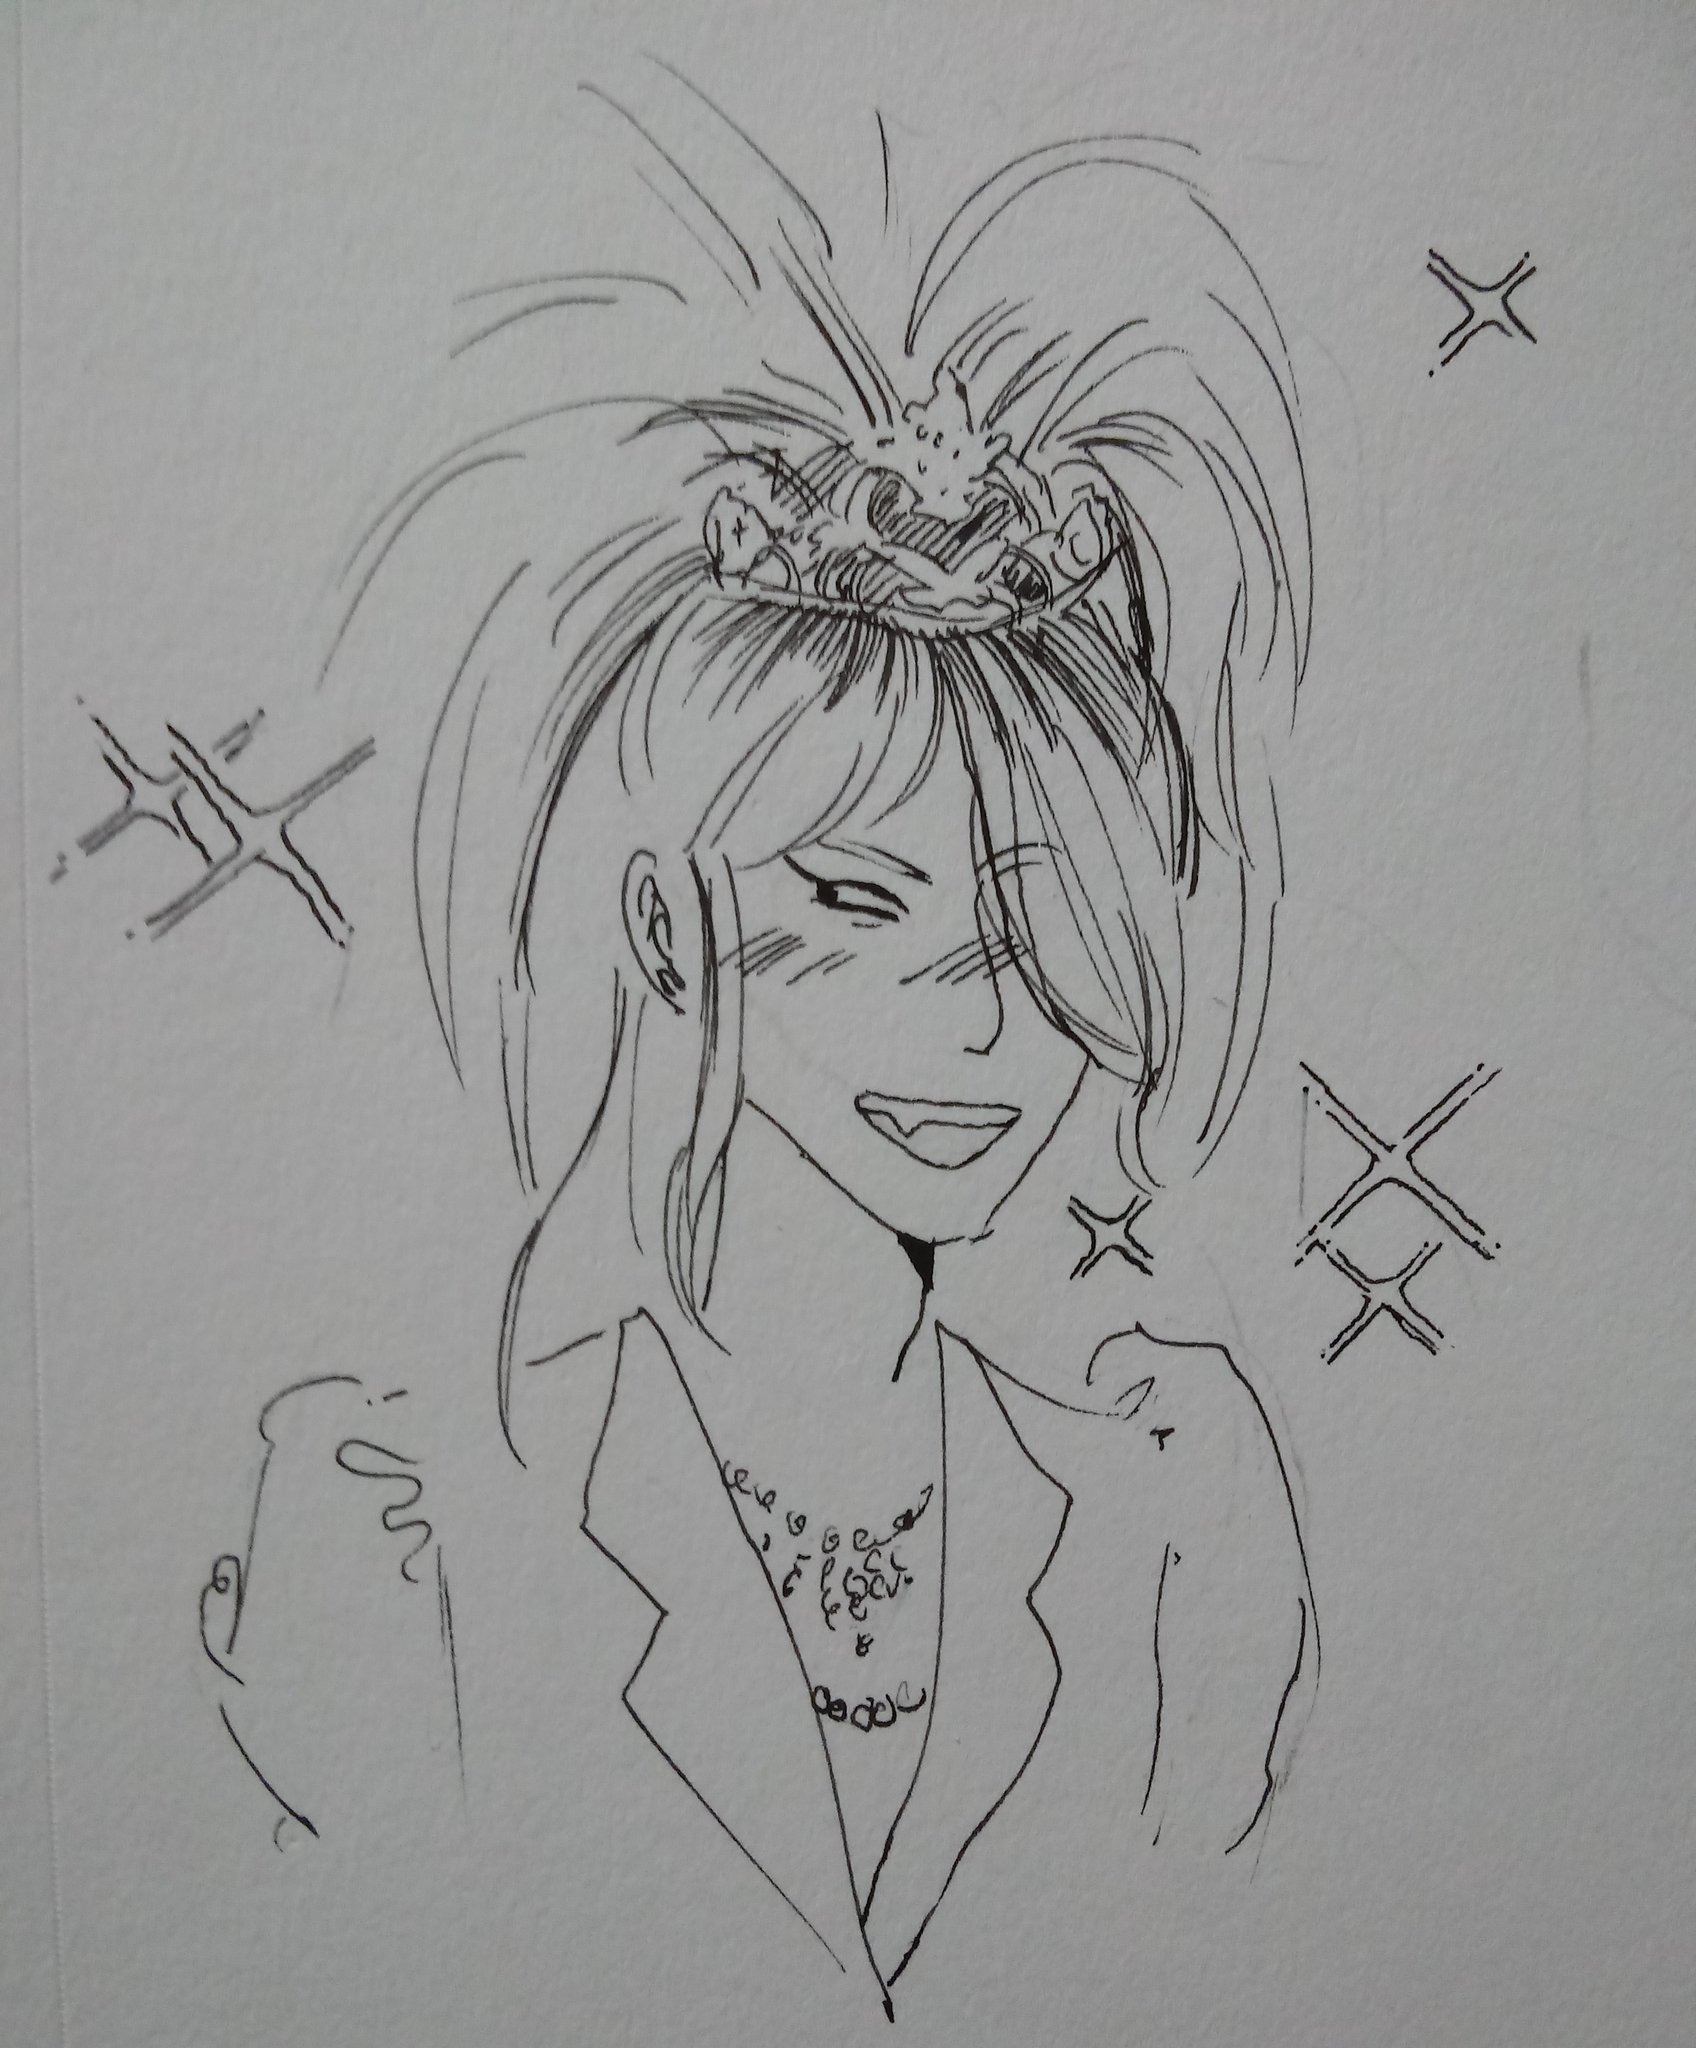 A black pen drawing on white paper. Yoshiki smiling with his canine tooth emphasized. He is wearing a tiara and a poofy sleeved dress. There are sparkles around him.